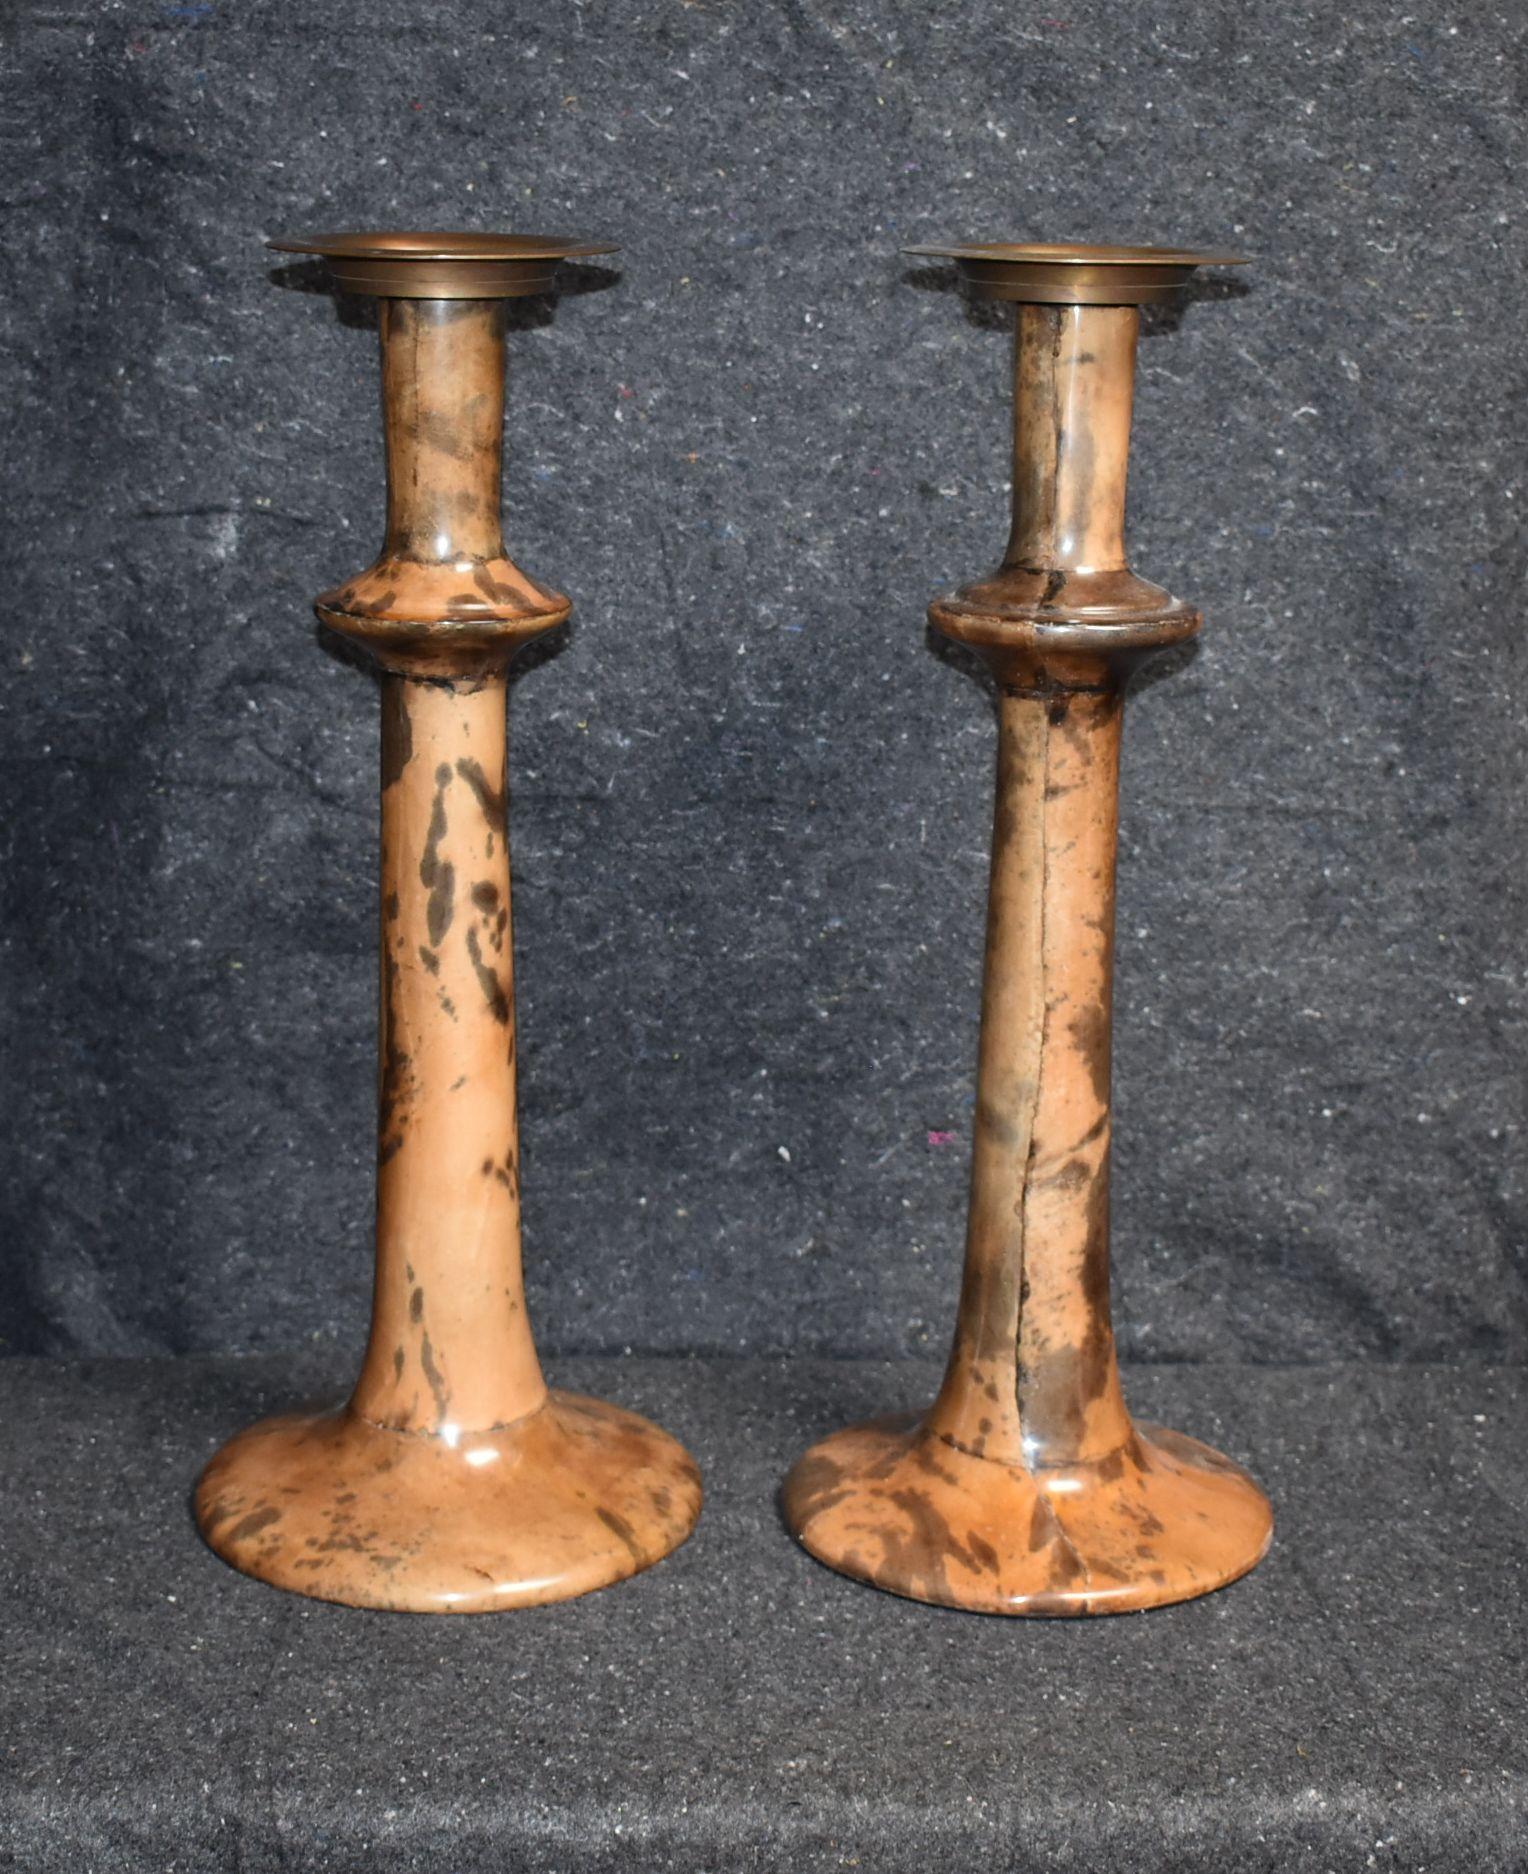 Pair of candleholders with antique brass finish top and goatskin.
Parchment is in varying shades of light and brown, beige, dark natural. (High gloss polyester resin filled finish).

Additional dimension:
Diameter of top 5.75 inches.